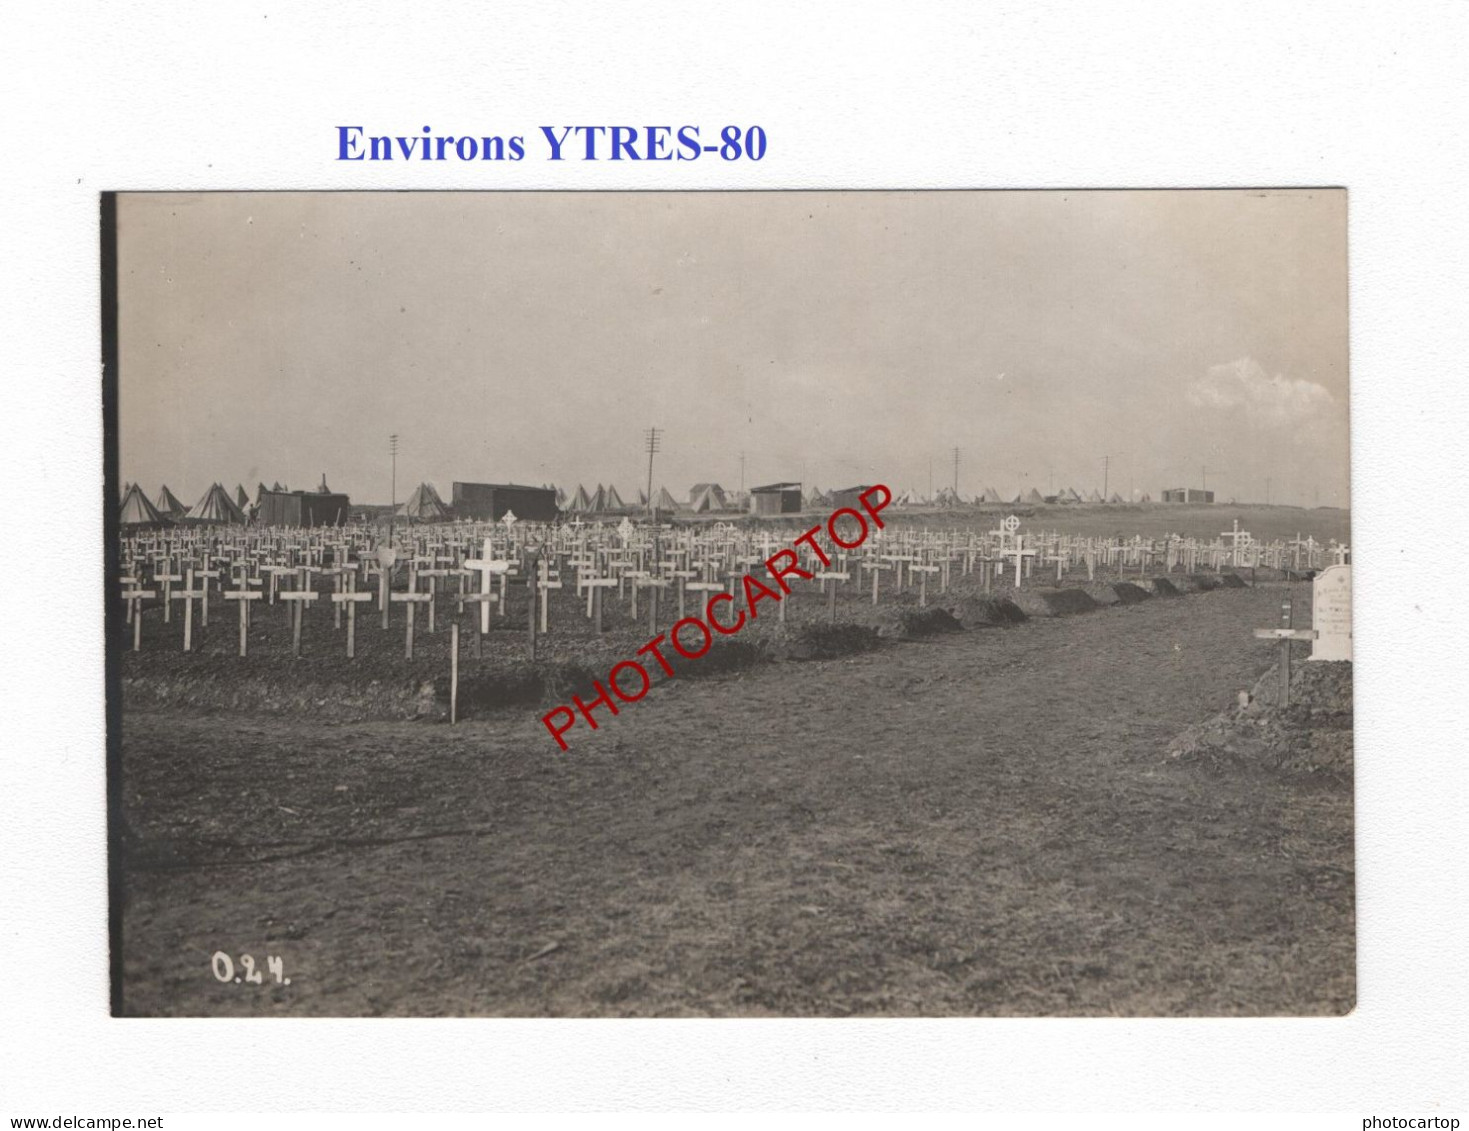 Environs YTRES-80-Cimetiere-Tombes-Tentes-PHOTO Allemande Comme CP-GUERRE 14-18-1 WK-MILITARIA- - War Cemeteries